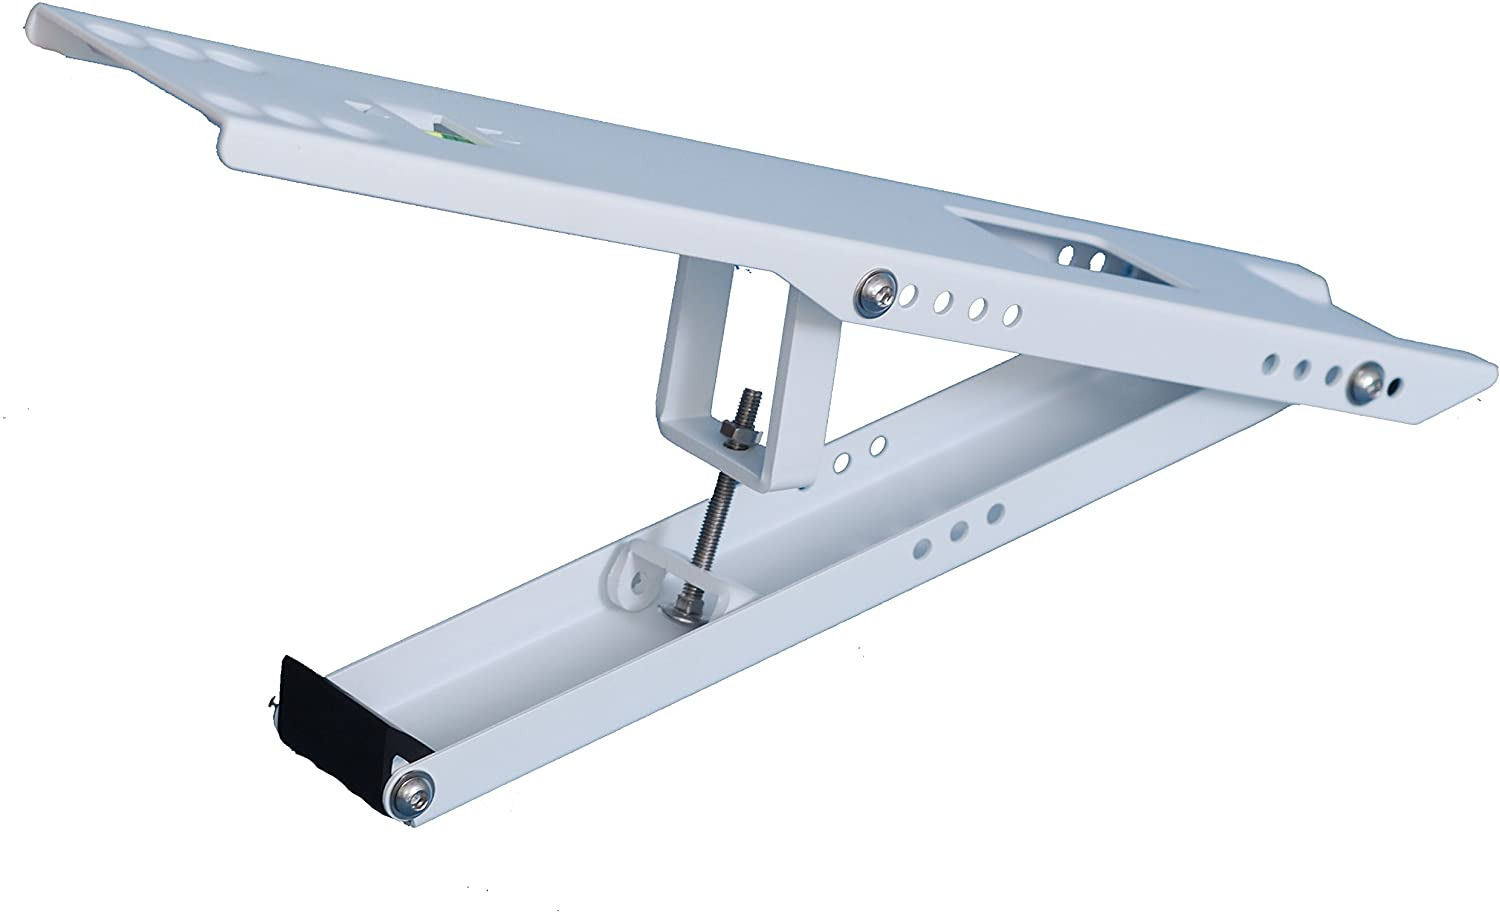 Universal Heavy Duty Window Air Conditioner AC Support Bracket, Up to 165 lbs,